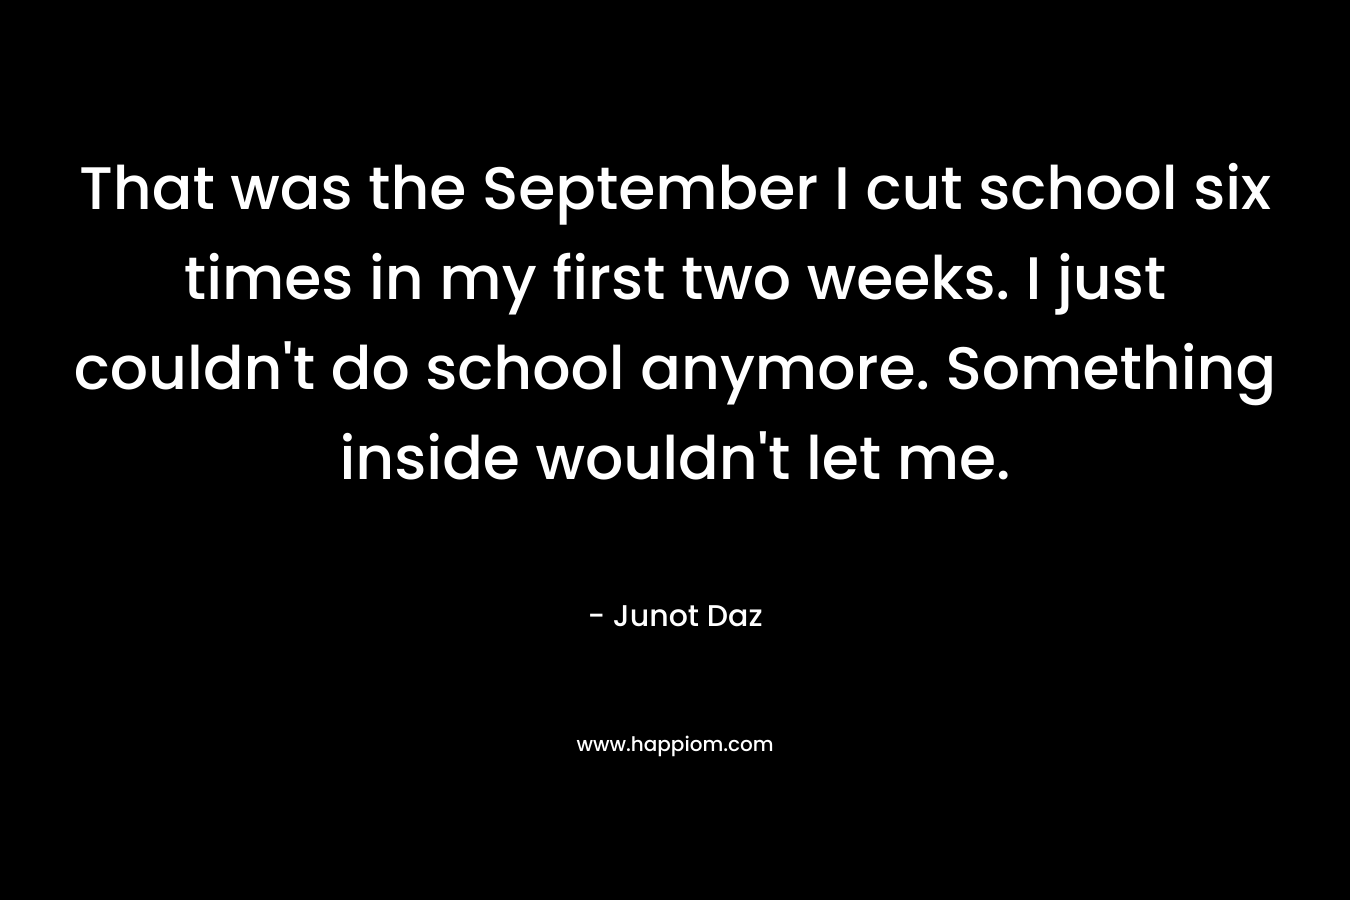 That was the September I cut school six times in my first two weeks. I just couldn't do school anymore. Something inside wouldn't let me.